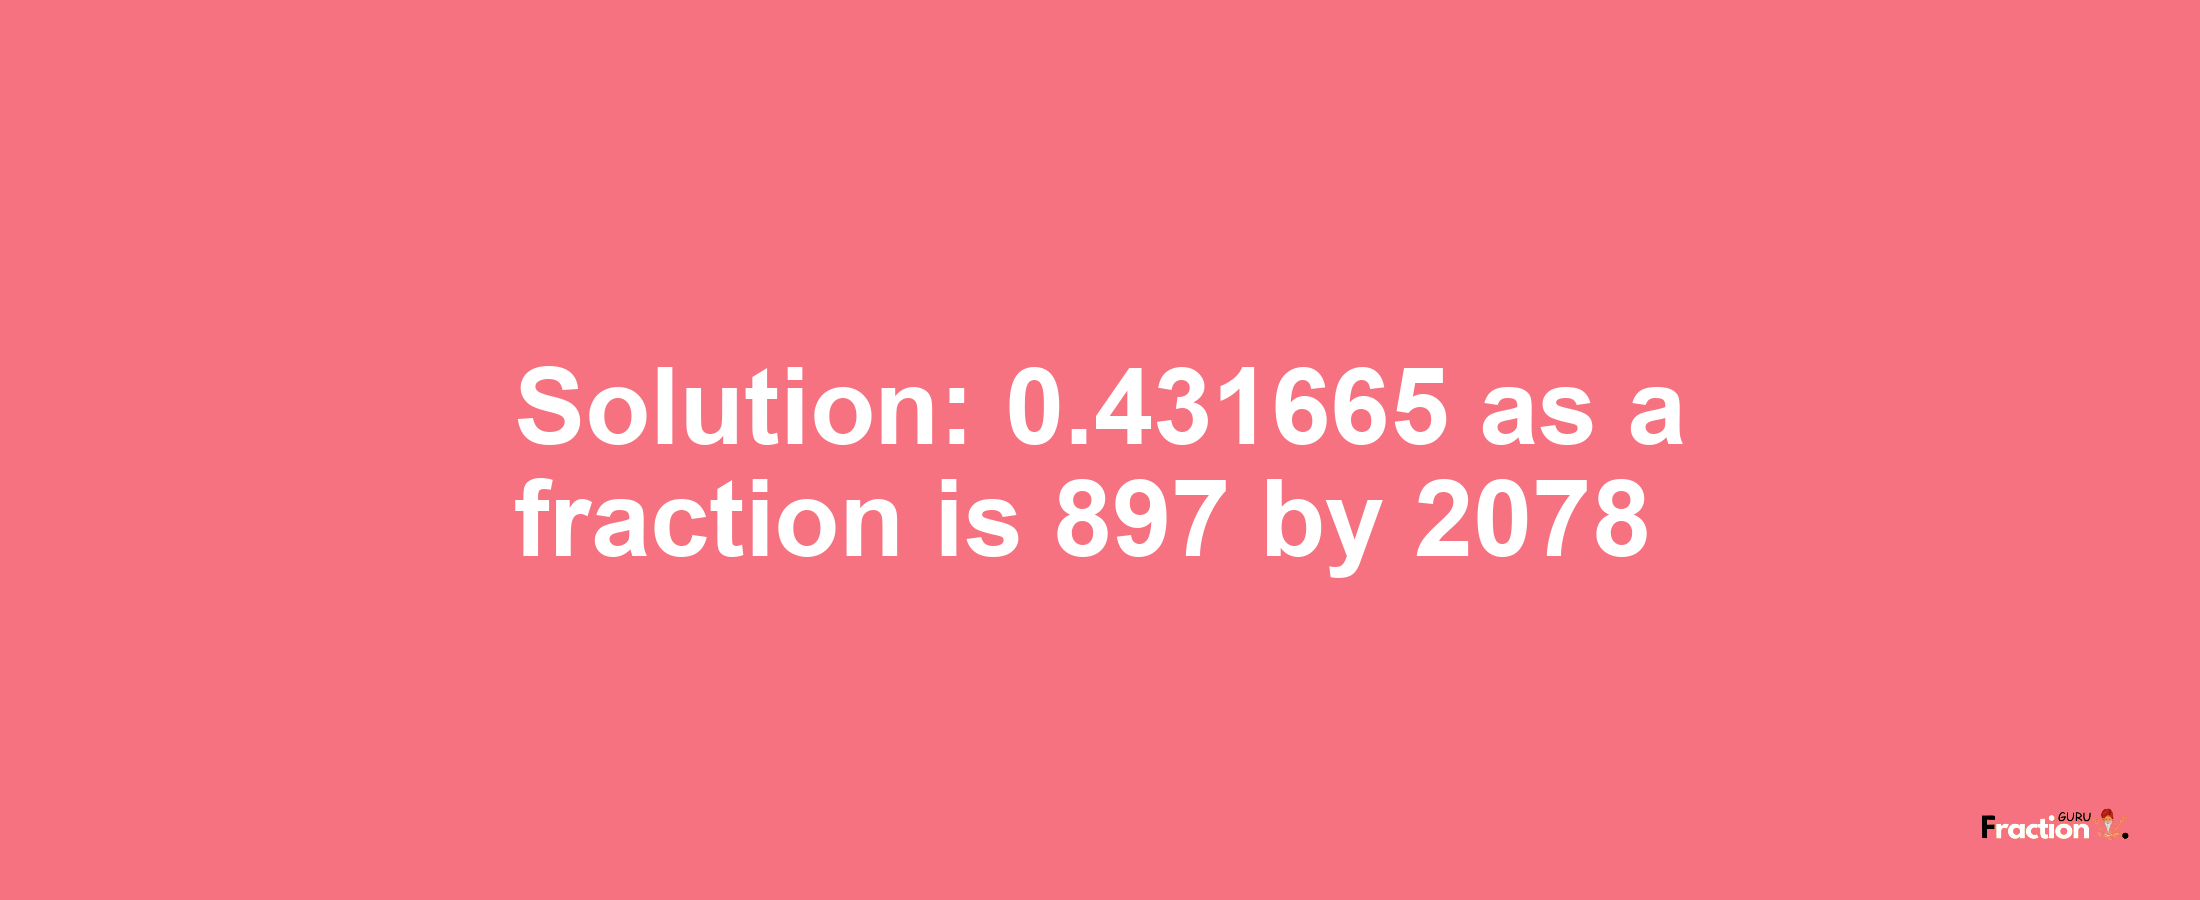 Solution:0.431665 as a fraction is 897/2078